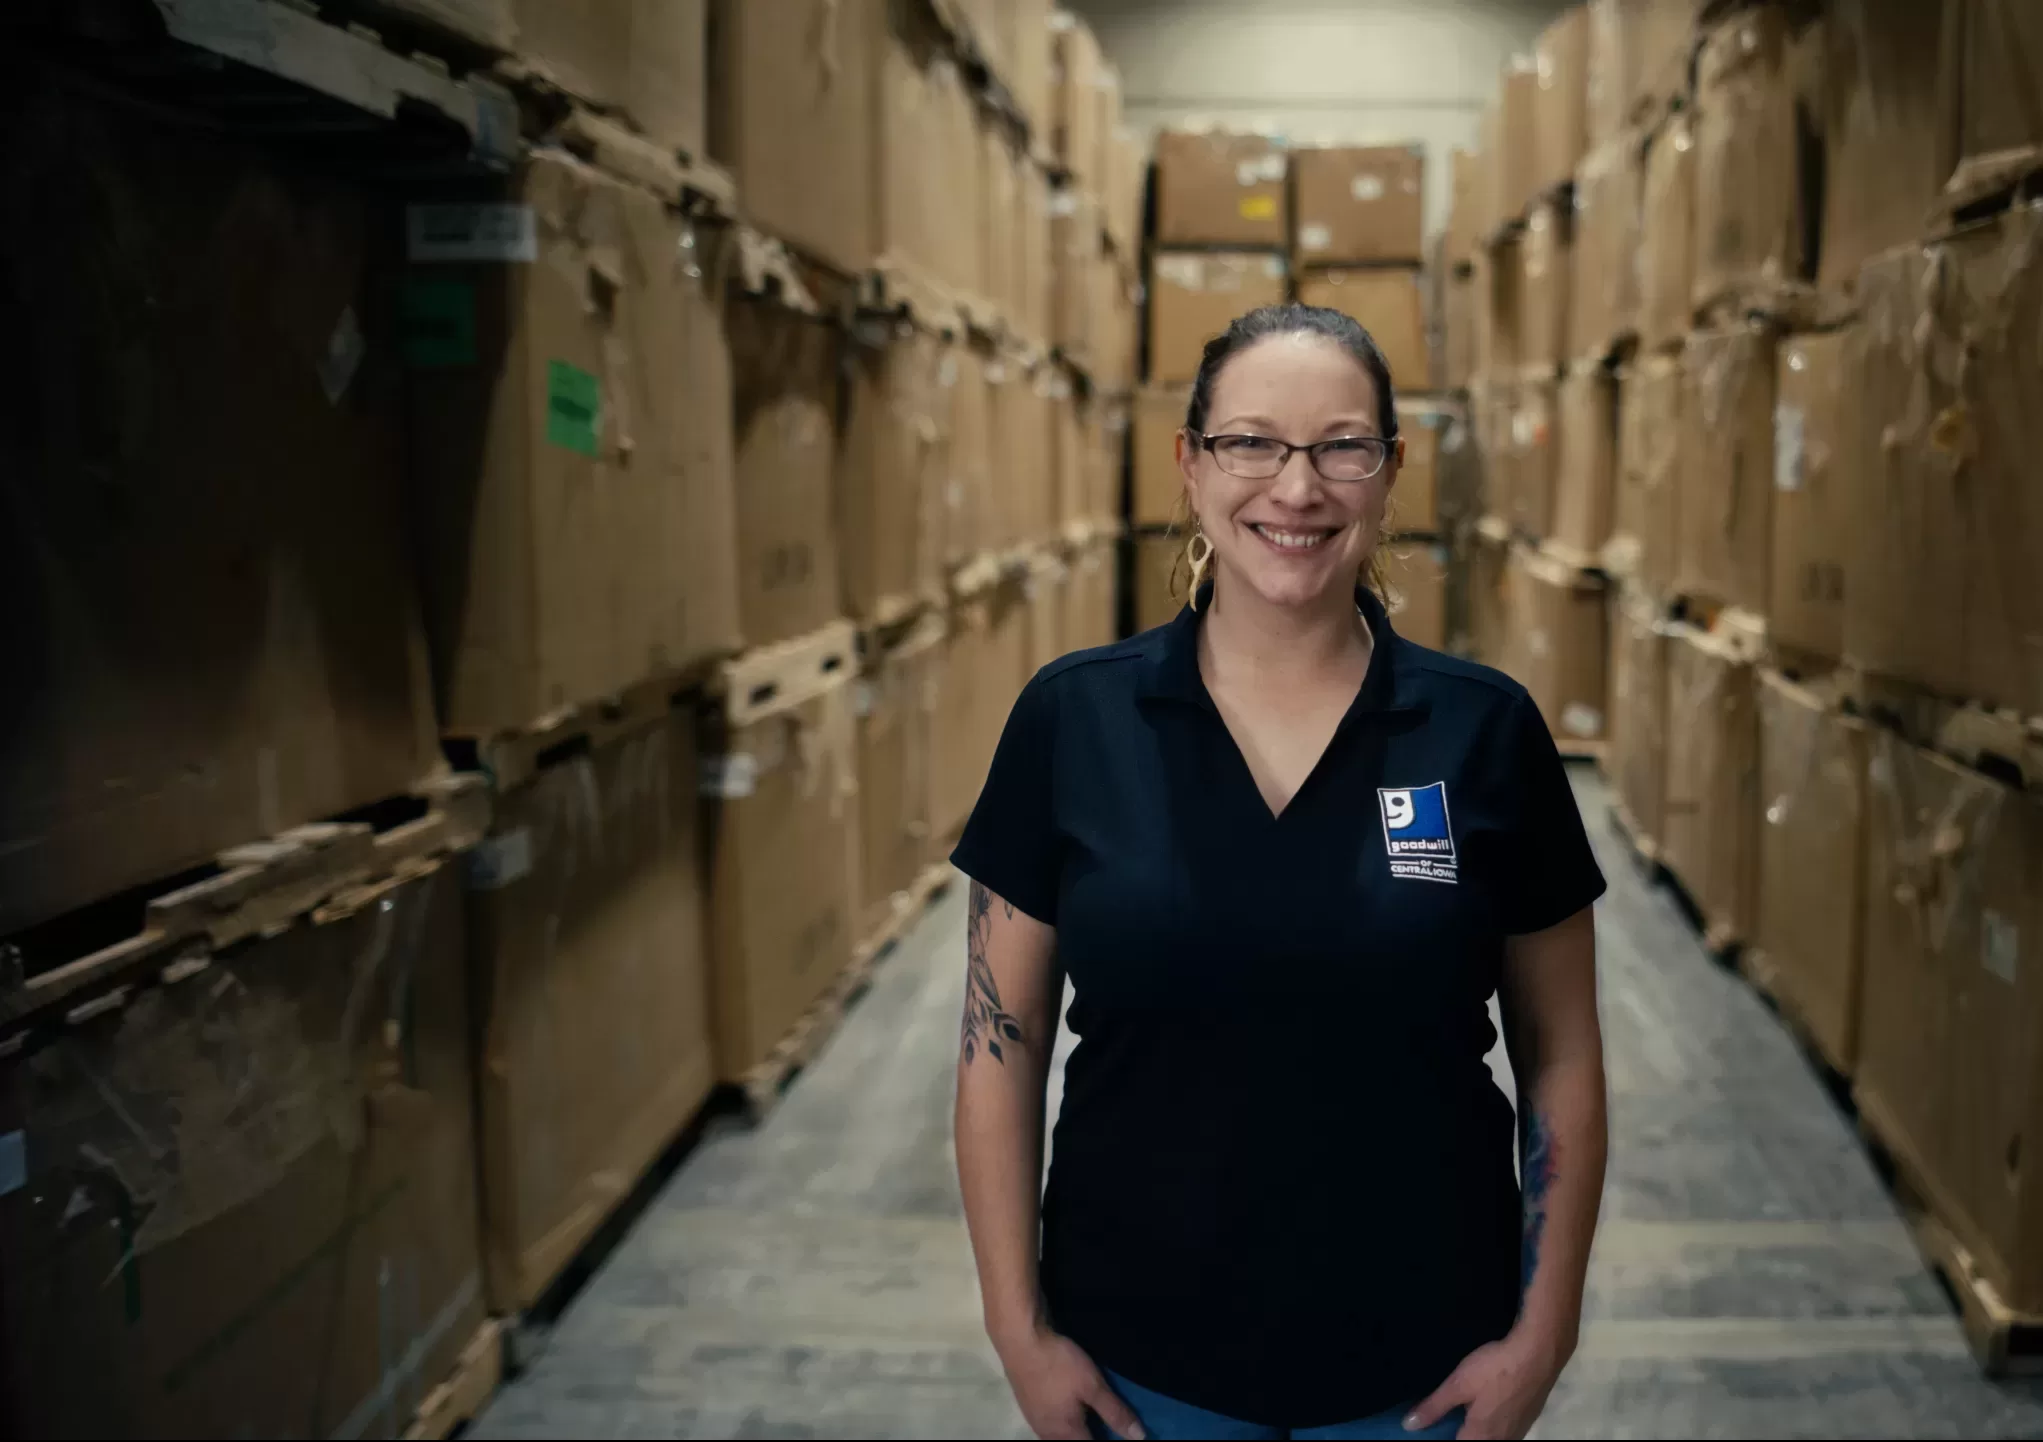 woman with glasses and goodwill polo stands in a room full of cardboard boxes